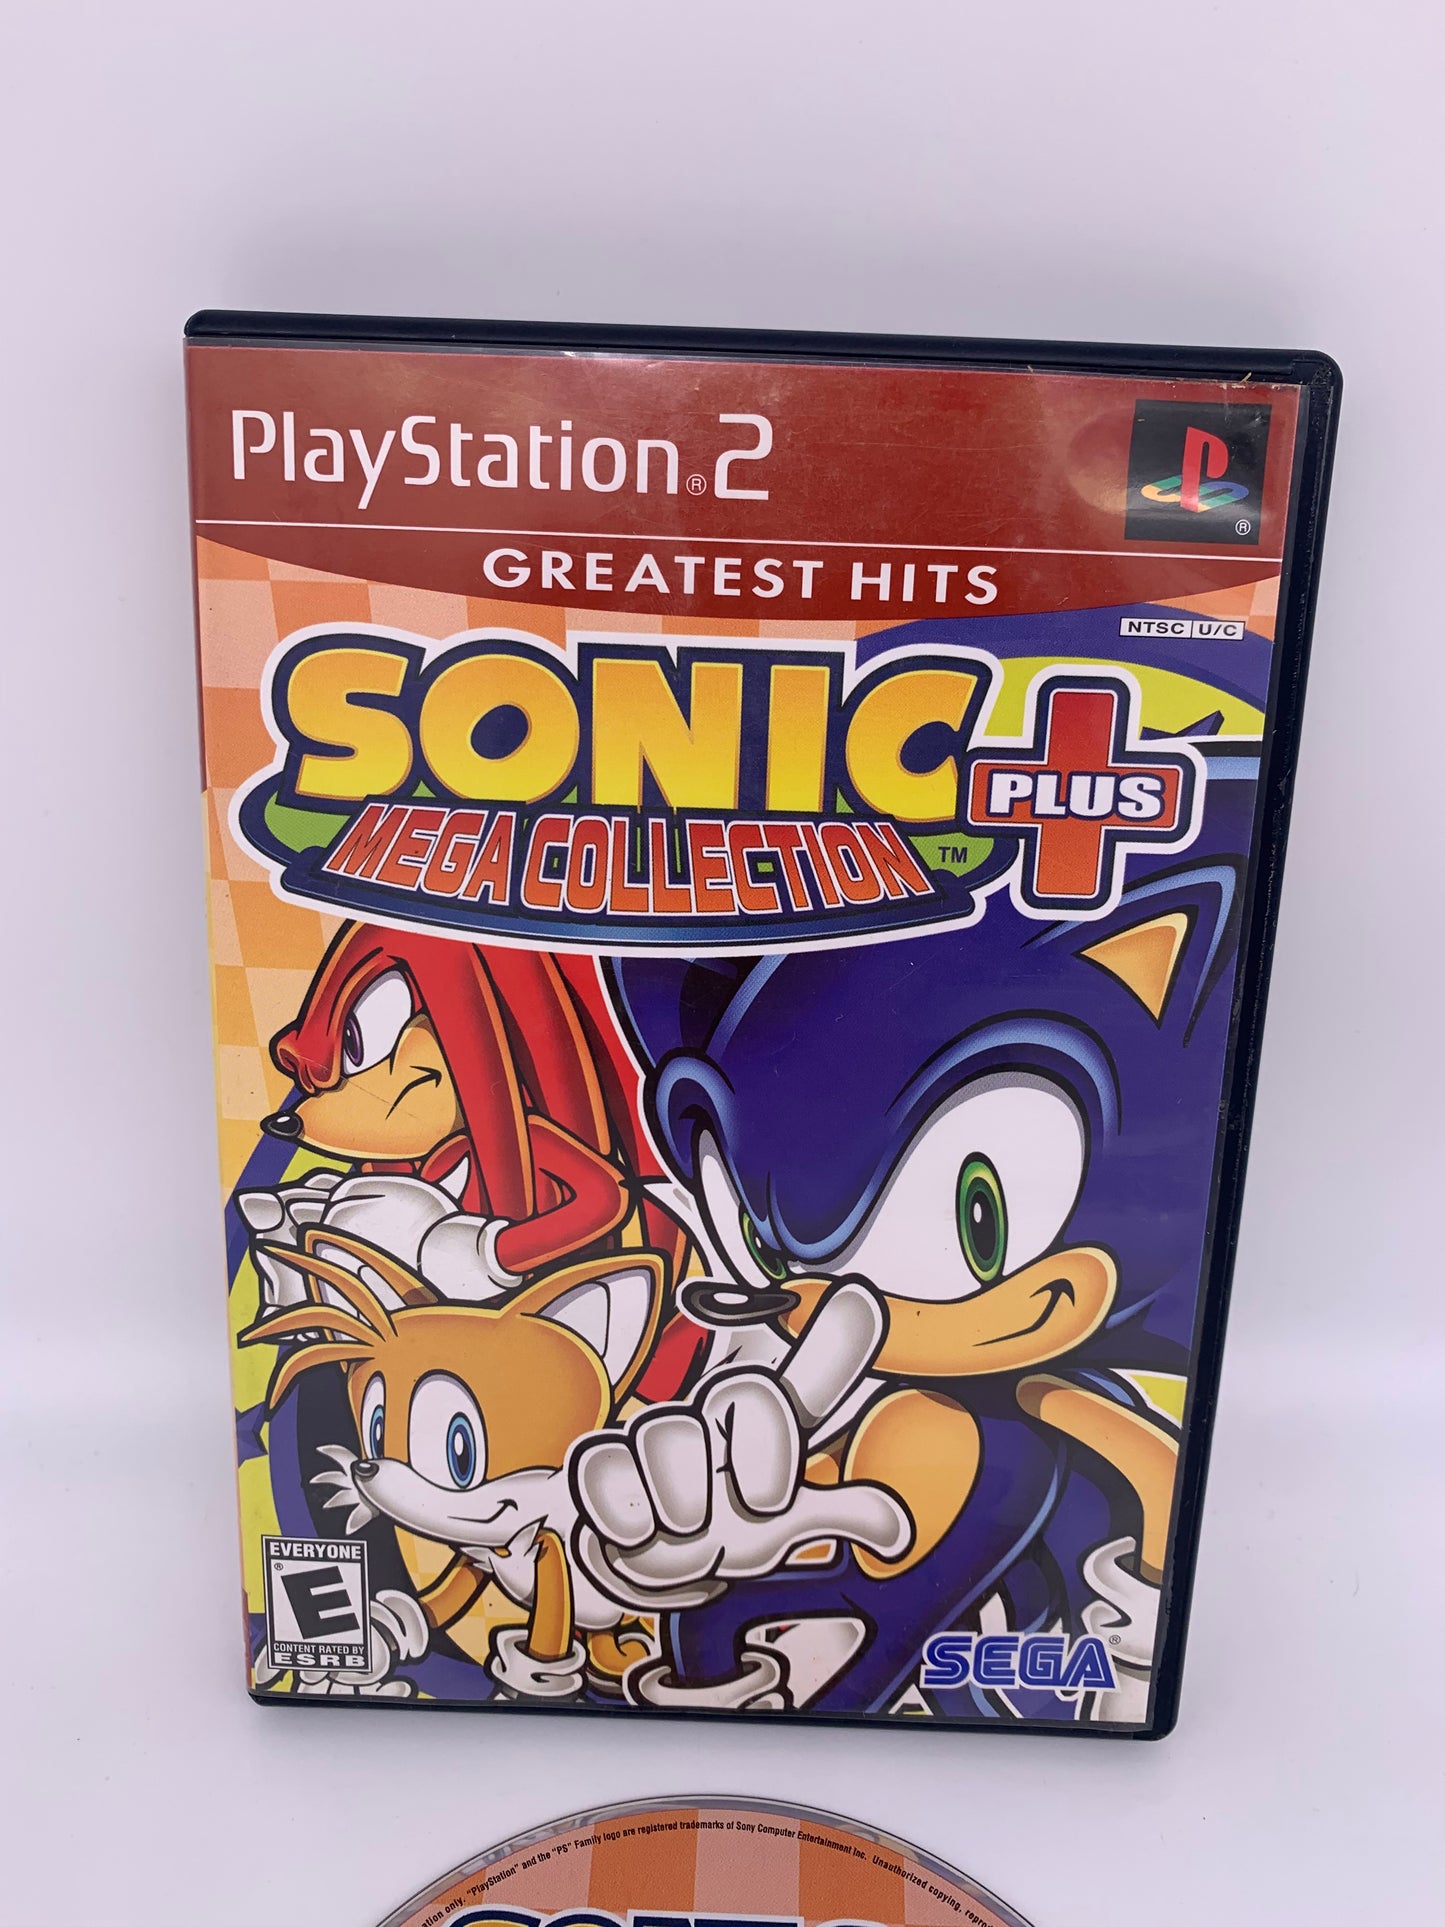 SONY PLAYSTATiON 2 [PS2] | SONiC MEGA COLLECTiON PLUS | GREATEST HiTS